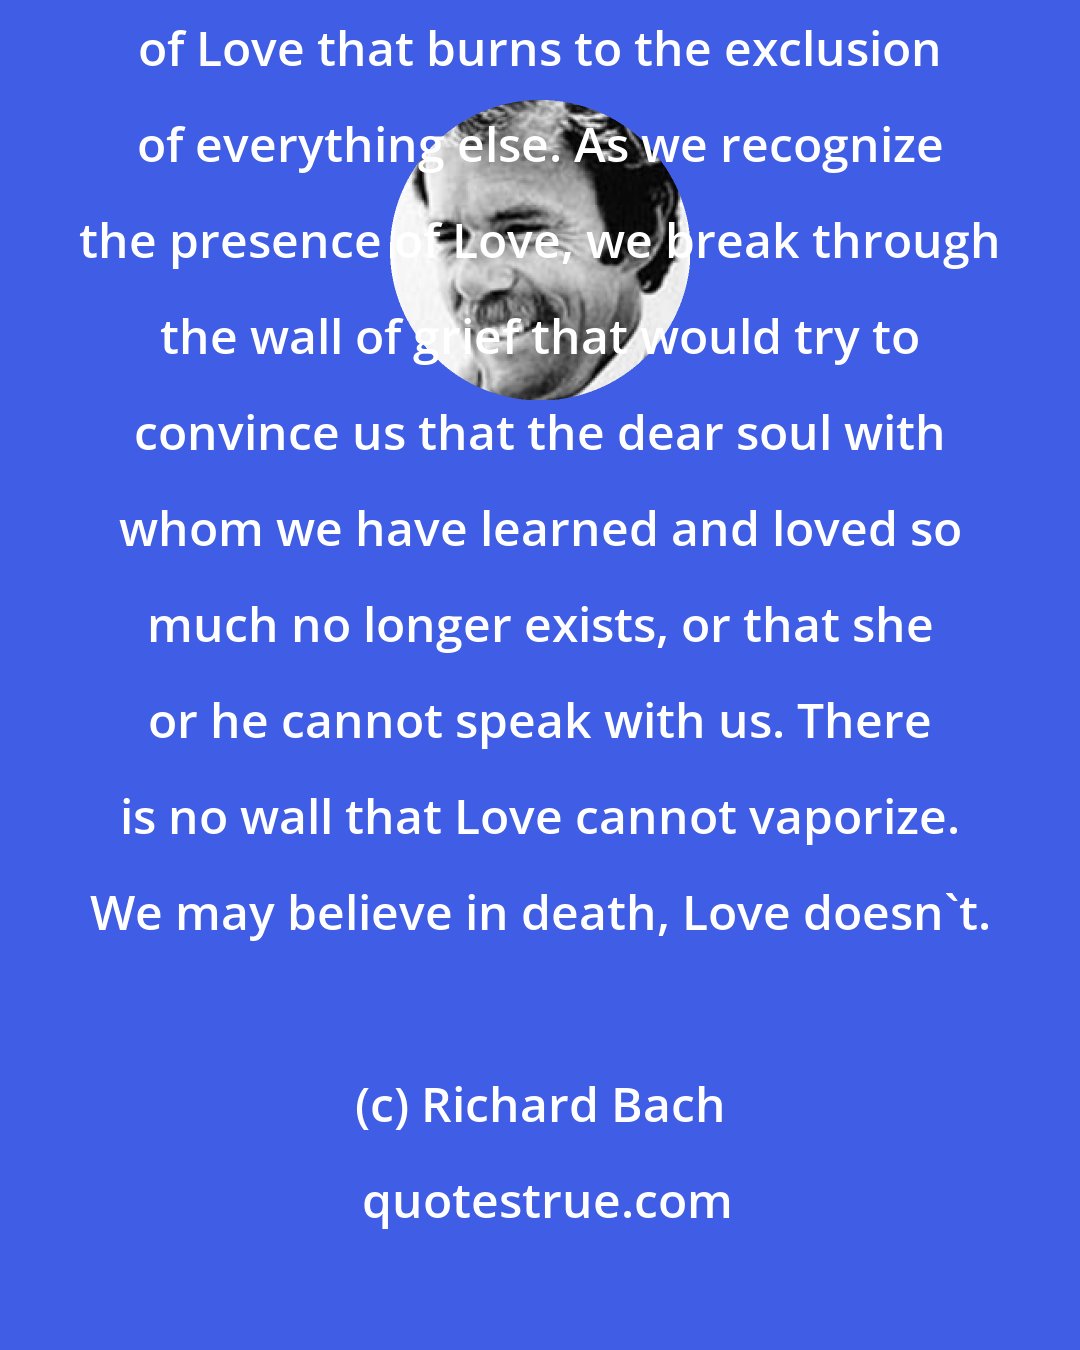 Richard Bach: The only thing that's real in any universe [is] that brilliant fire of Love that burns to the exclusion of everything else. As we recognize the presence of Love, we break through the wall of grief that would try to convince us that the dear soul with whom we have learned and loved so much no longer exists, or that she or he cannot speak with us. There is no wall that Love cannot vaporize. We may believe in death, Love doesn't.